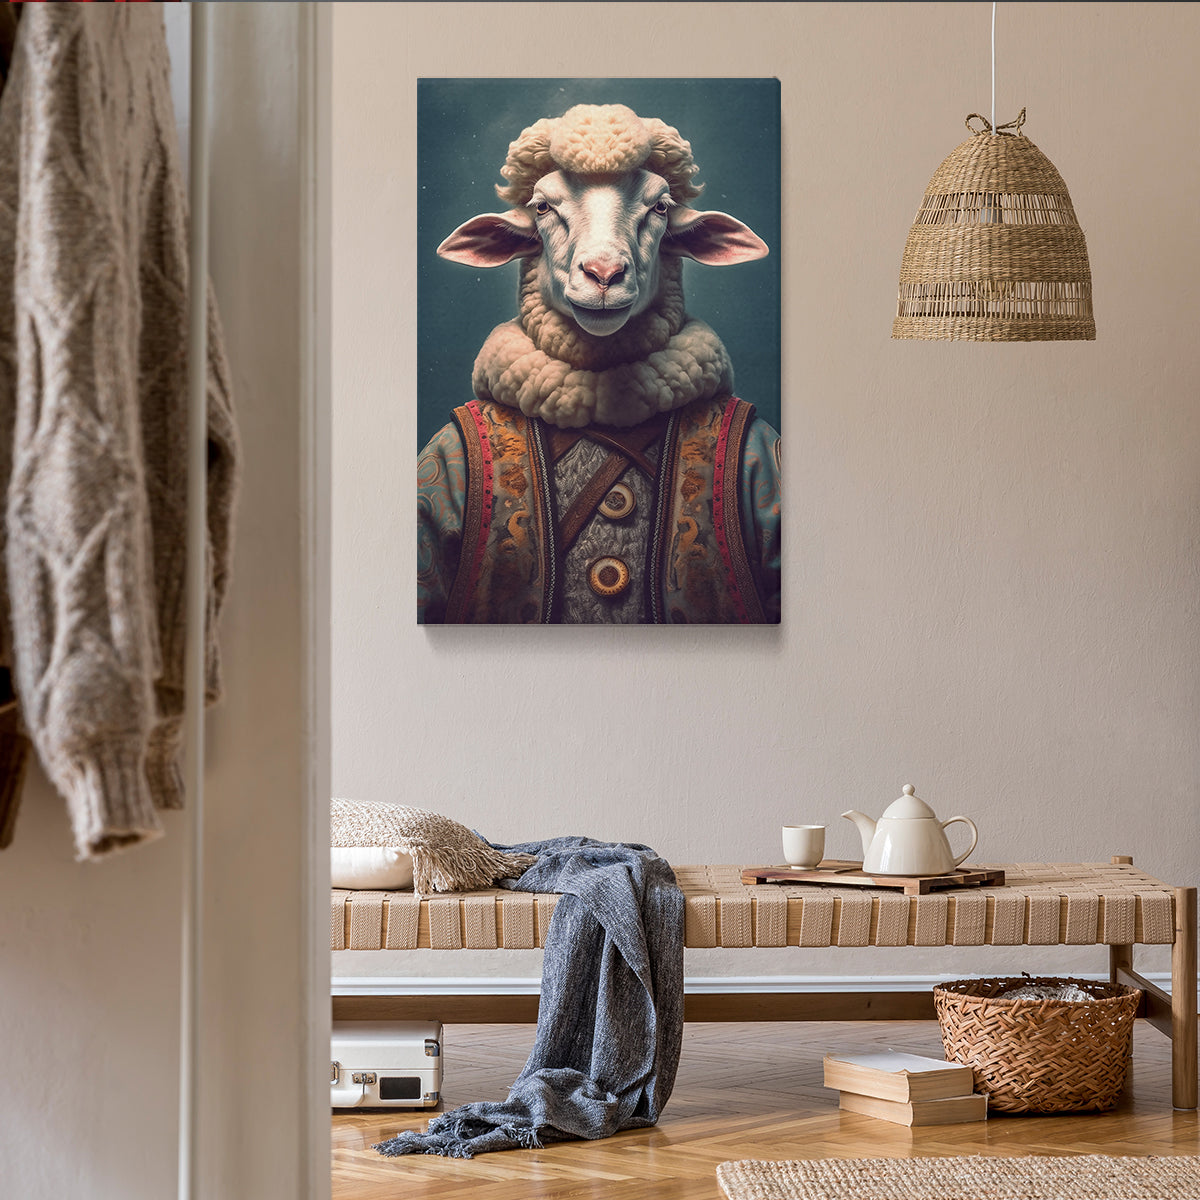 Sheep in Traditional Attire Canvas Prints Artesty 1 Panel 35"x55" 